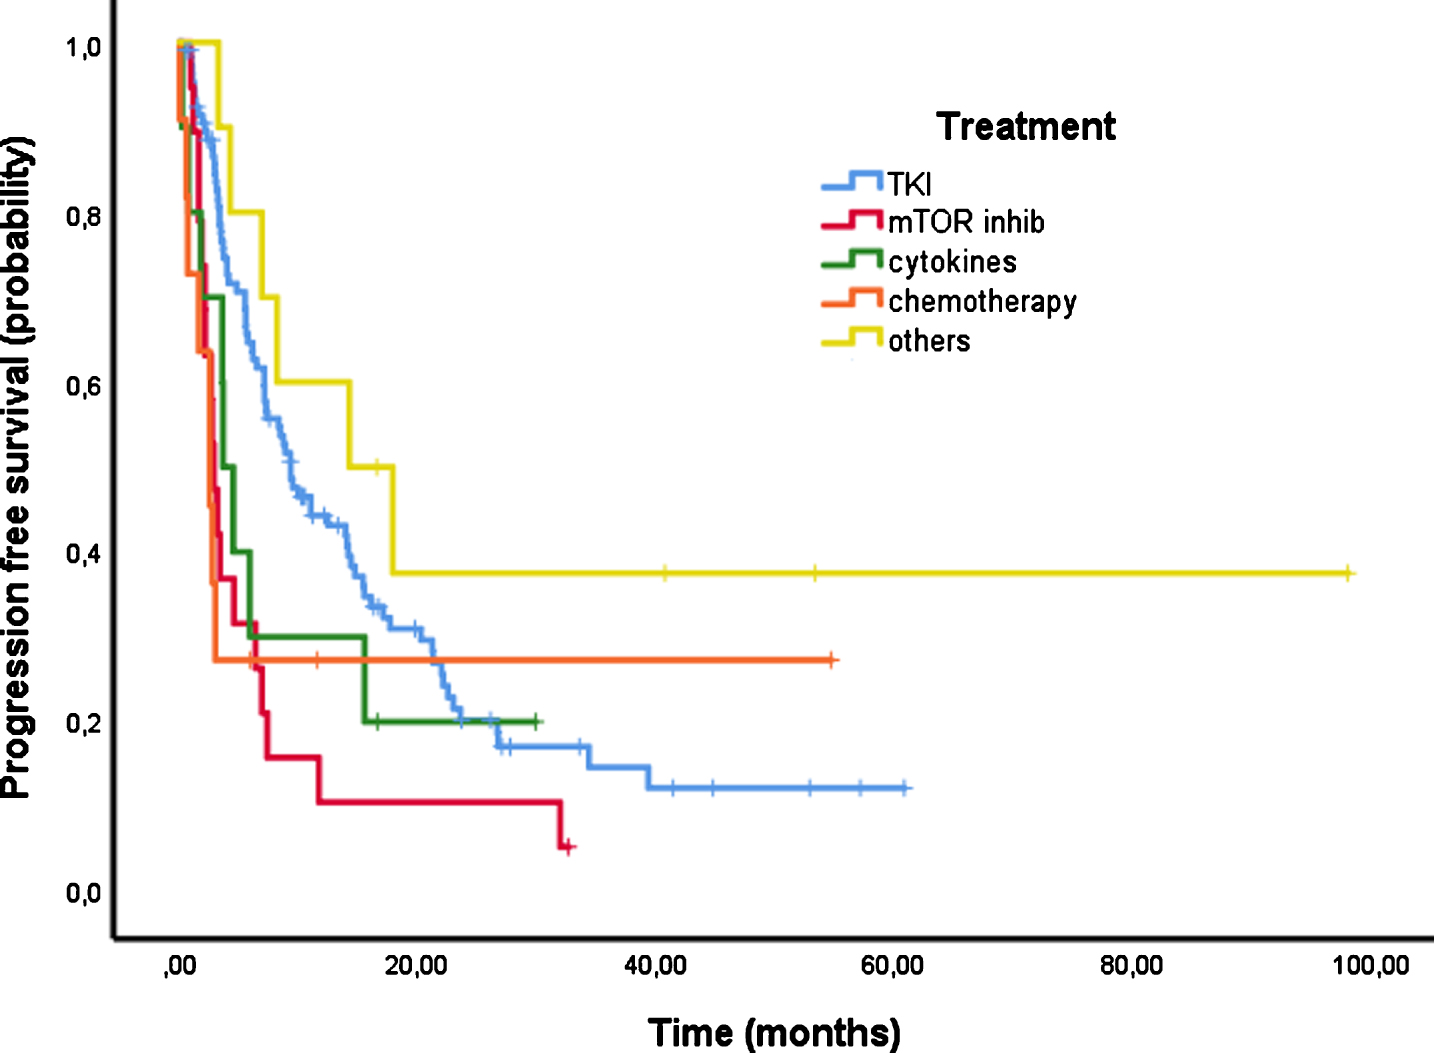 Progression free survival (PFS) according to first line treatment.